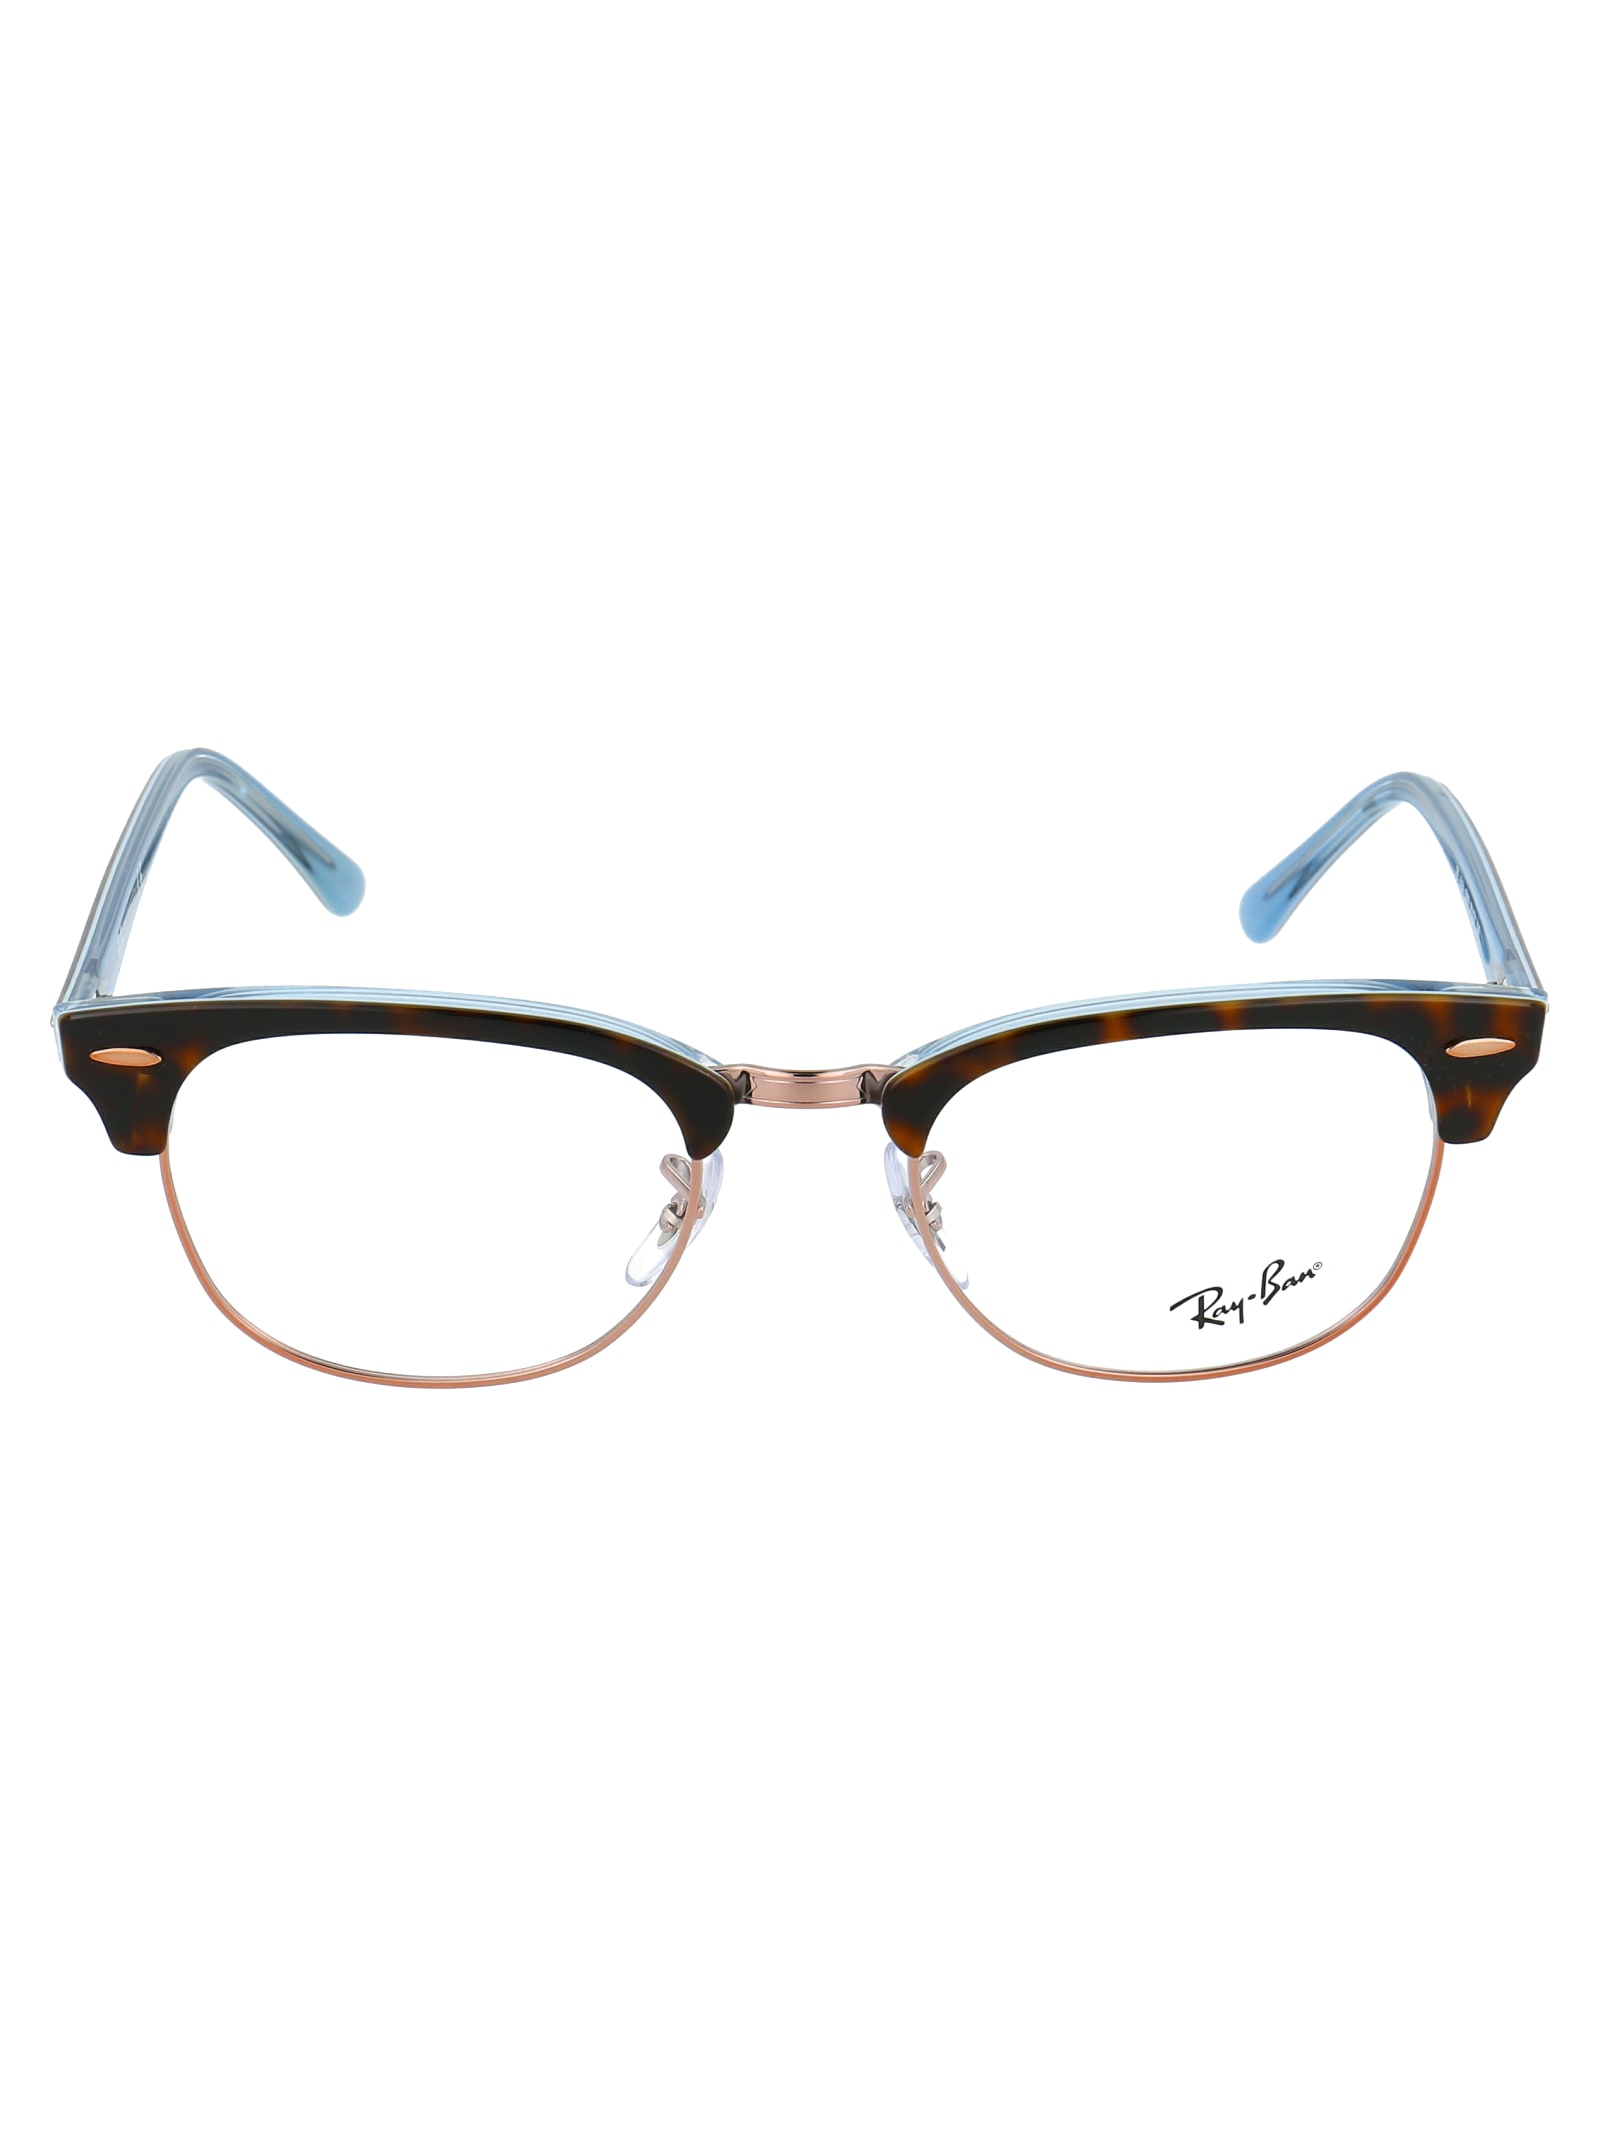 Ray Ban Clubmaster Glasses In 5885 Havana On Light Blue